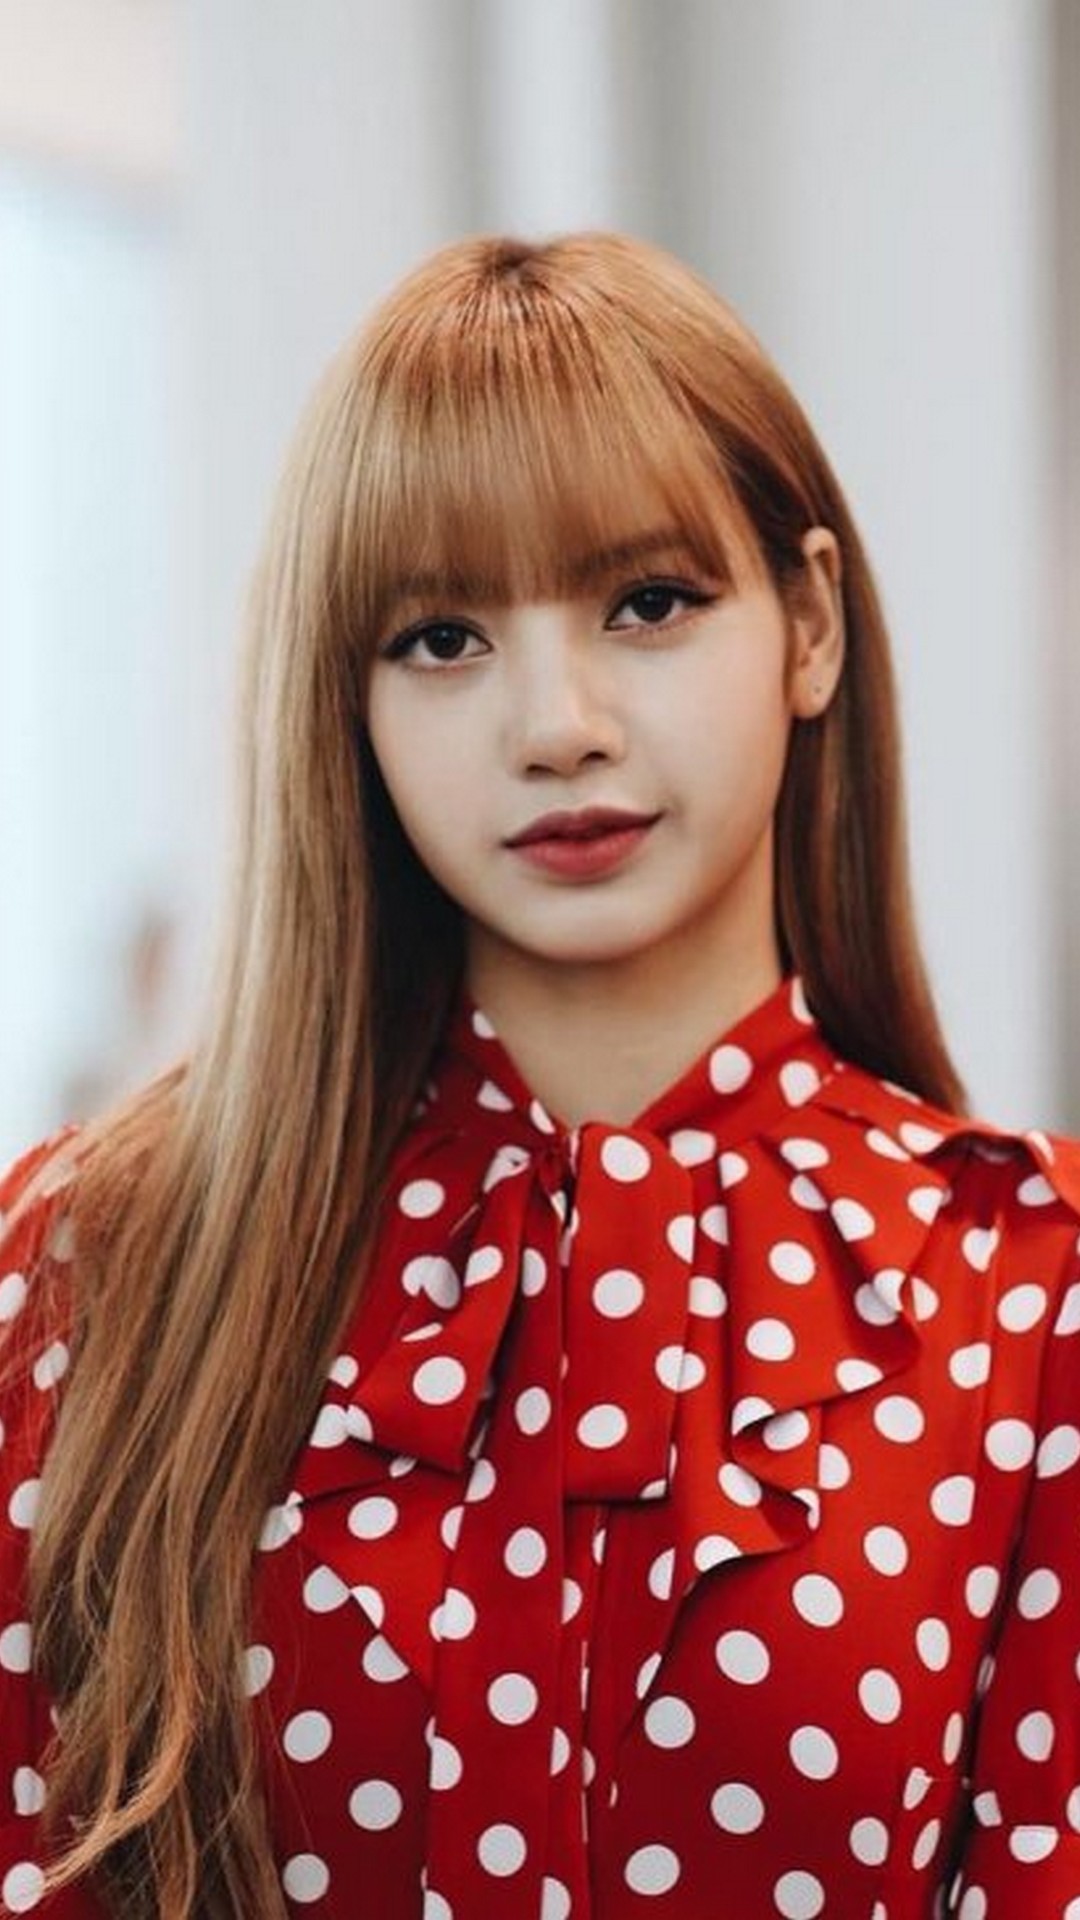 Lisa Blackpink iPhone X Wallpaper HD with high-resolution 1080x1920 pixel. Download all Mobile Wallpapers and Use them as wallpapers for your iPhone, Tablet, iPad, Android and other mobile devices